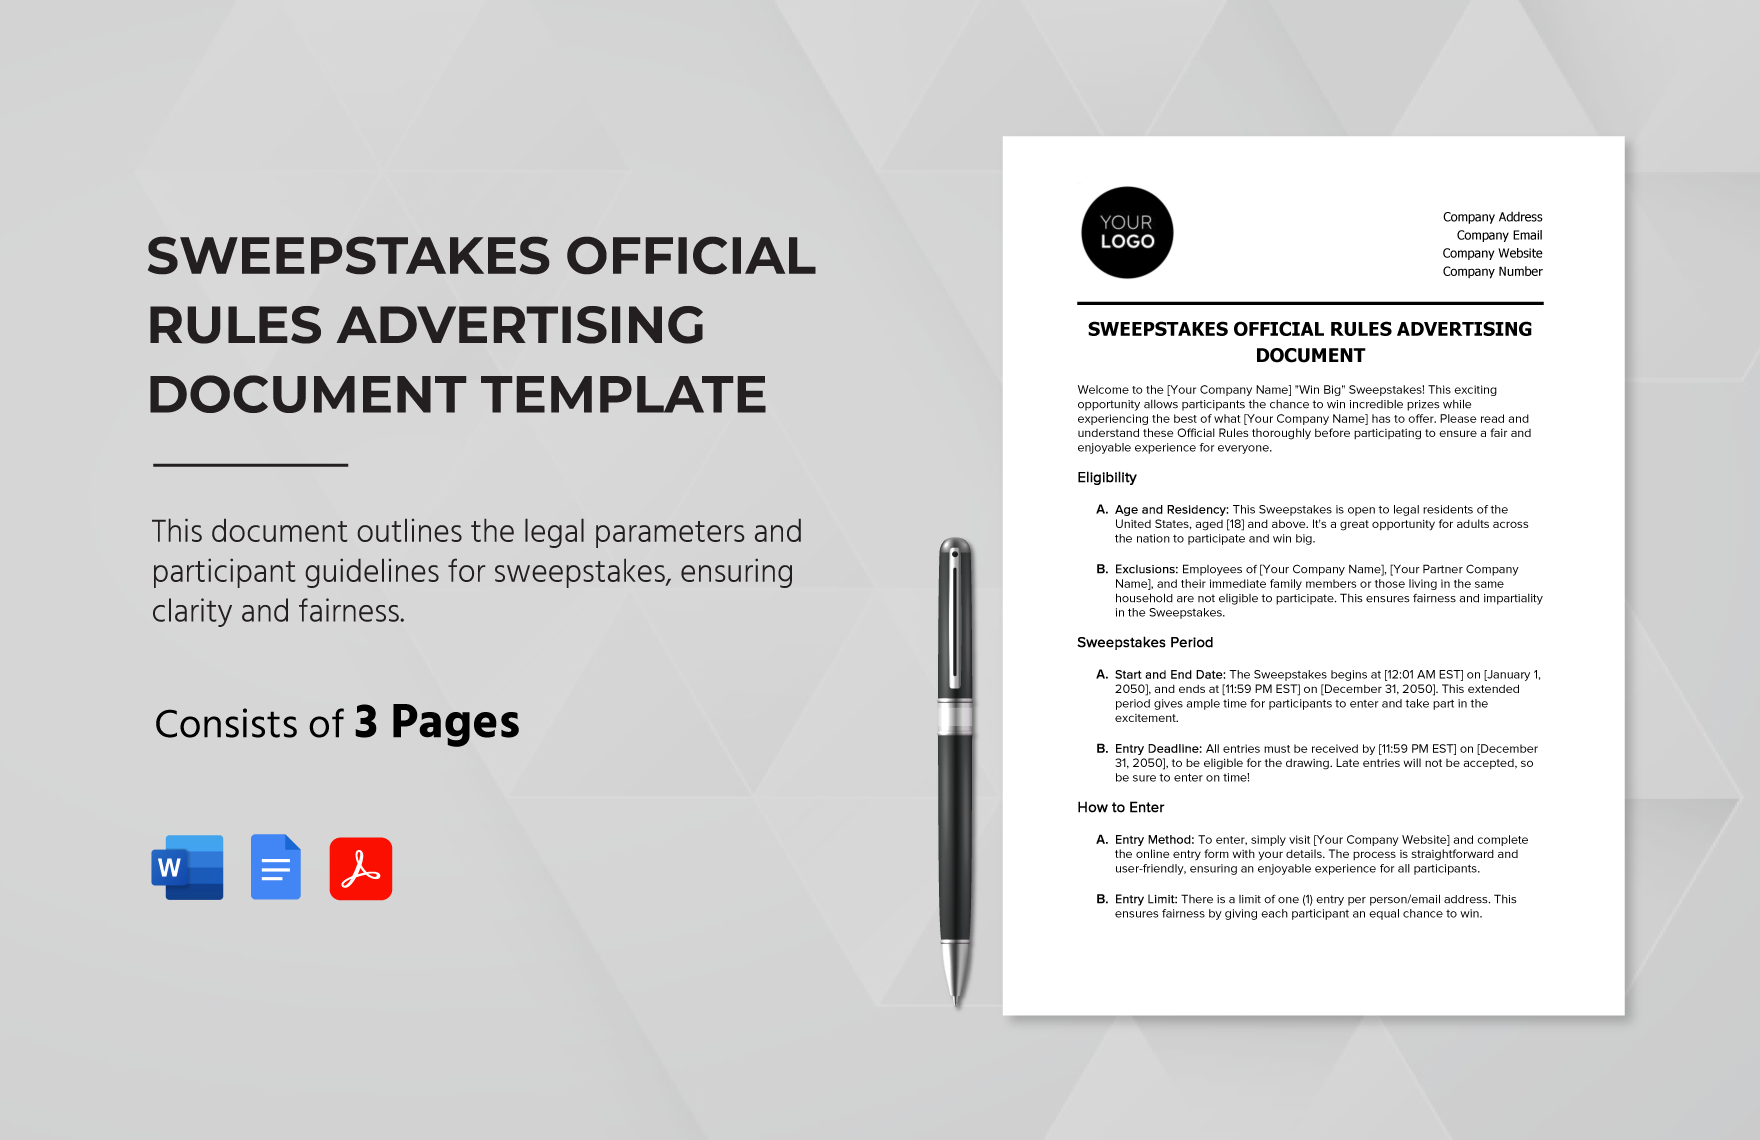 Sweepstakes Official Rules Advertising Document Template in Word, Google Docs, PDF